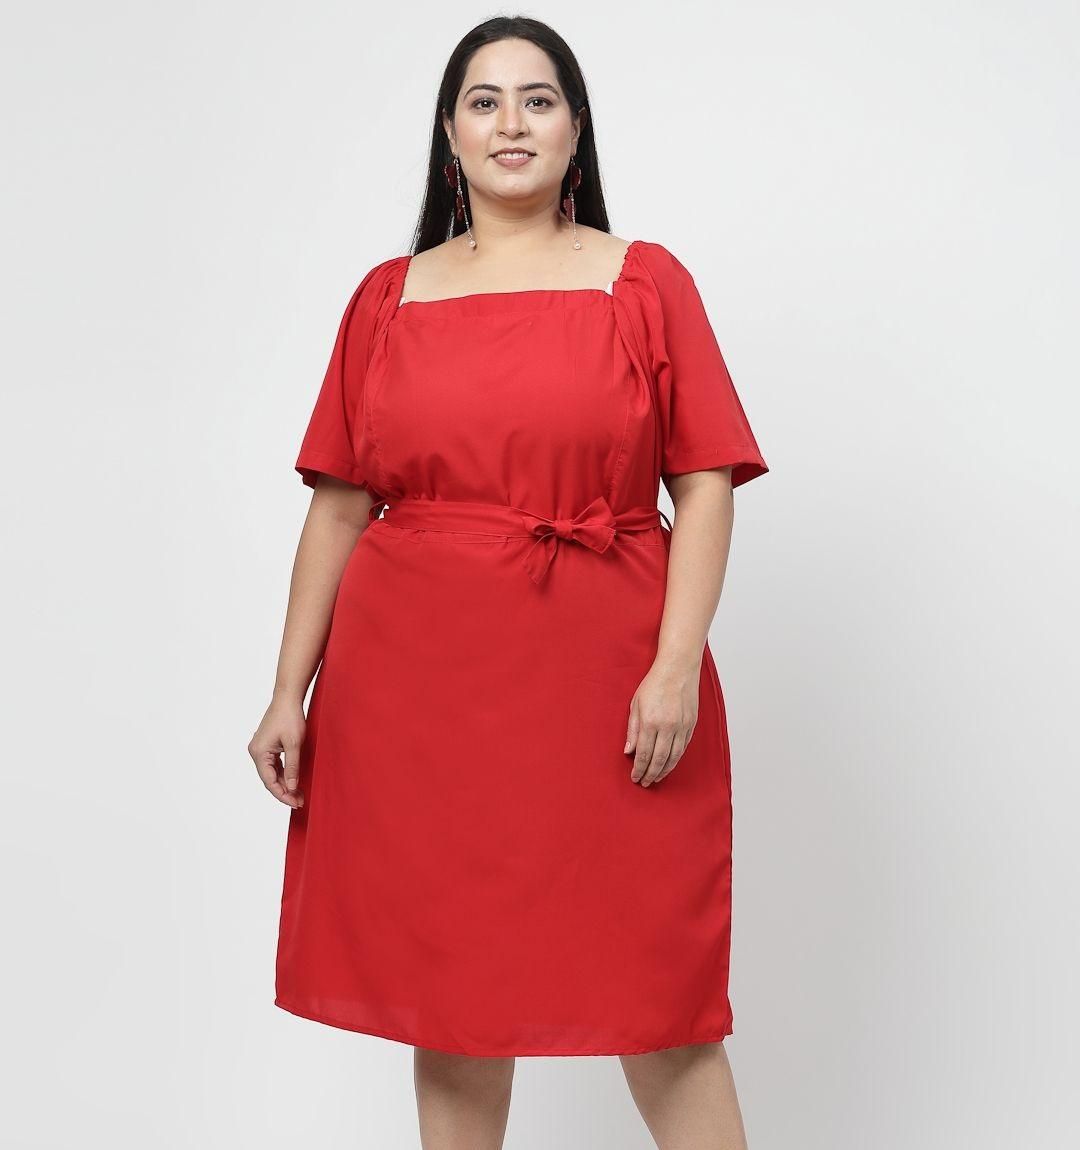 Flambeur Plus Size Red Solid Flared Short Dress for Women